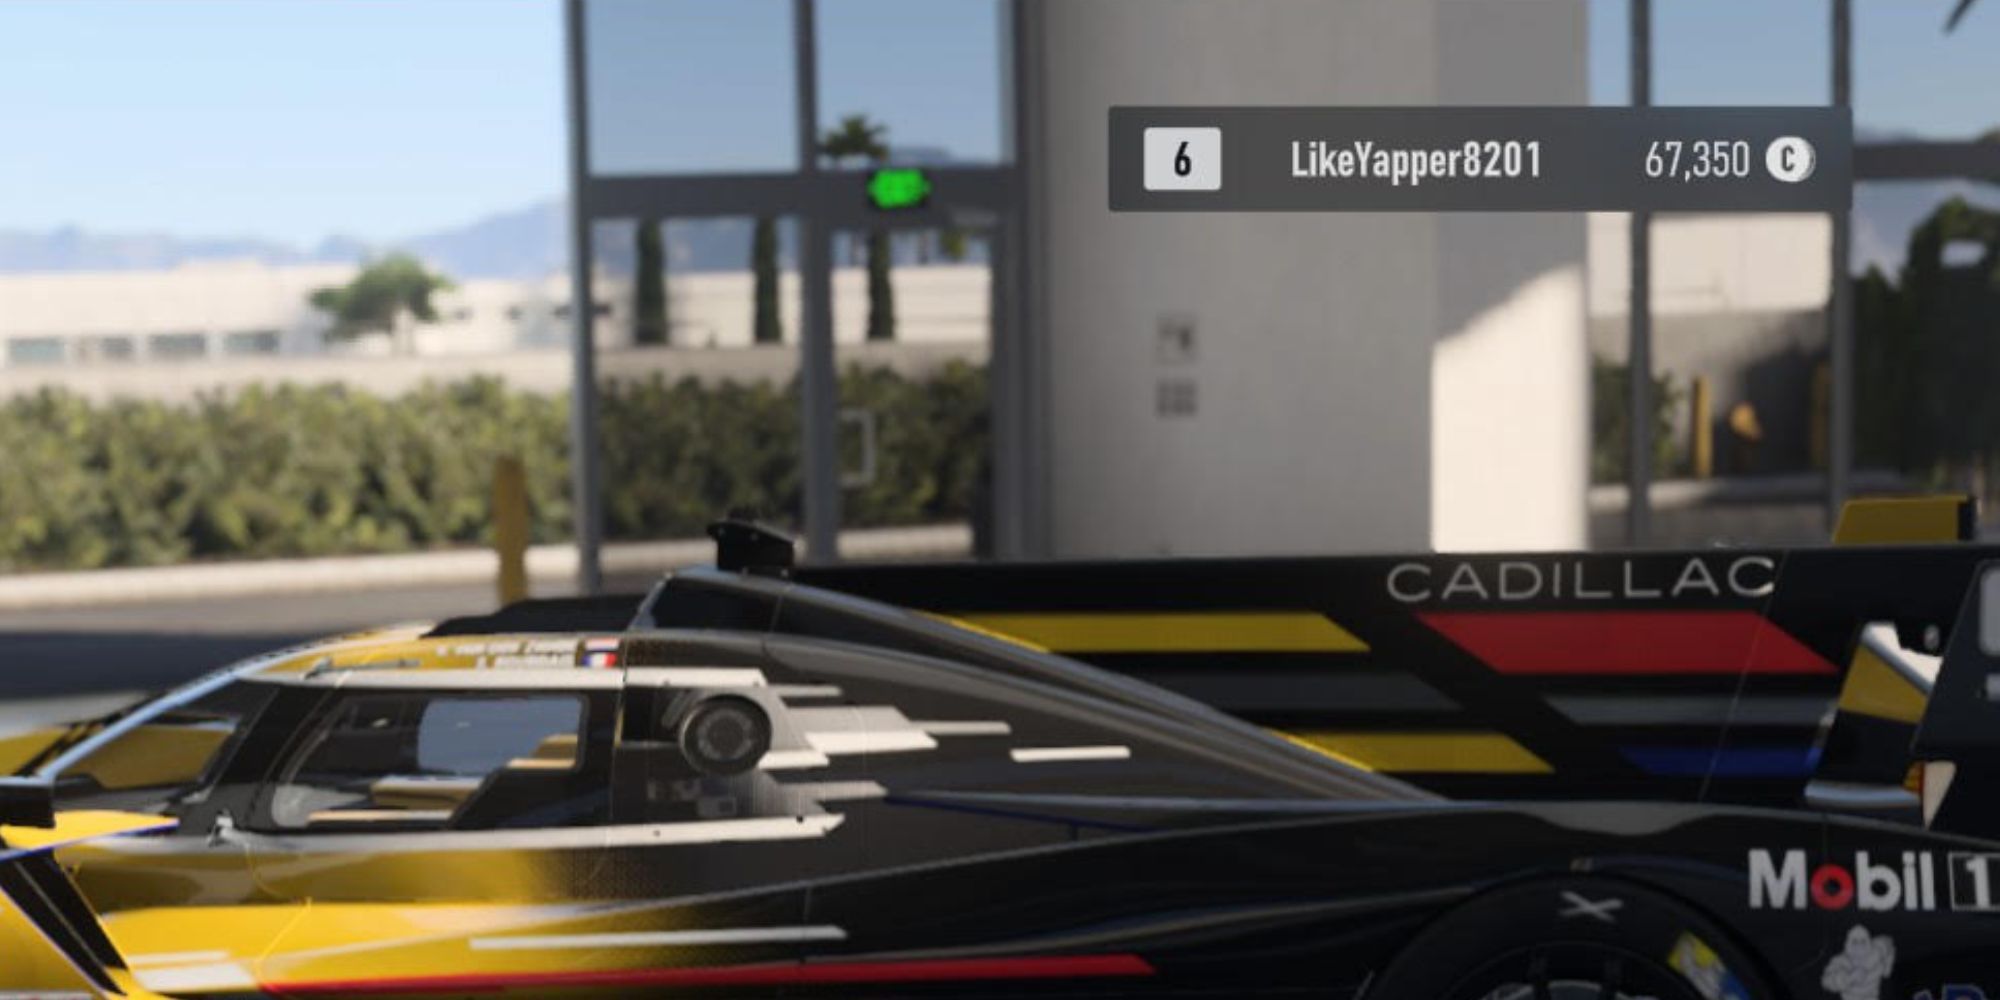 Review: Forza Motorsport (2023) refines simulation racing